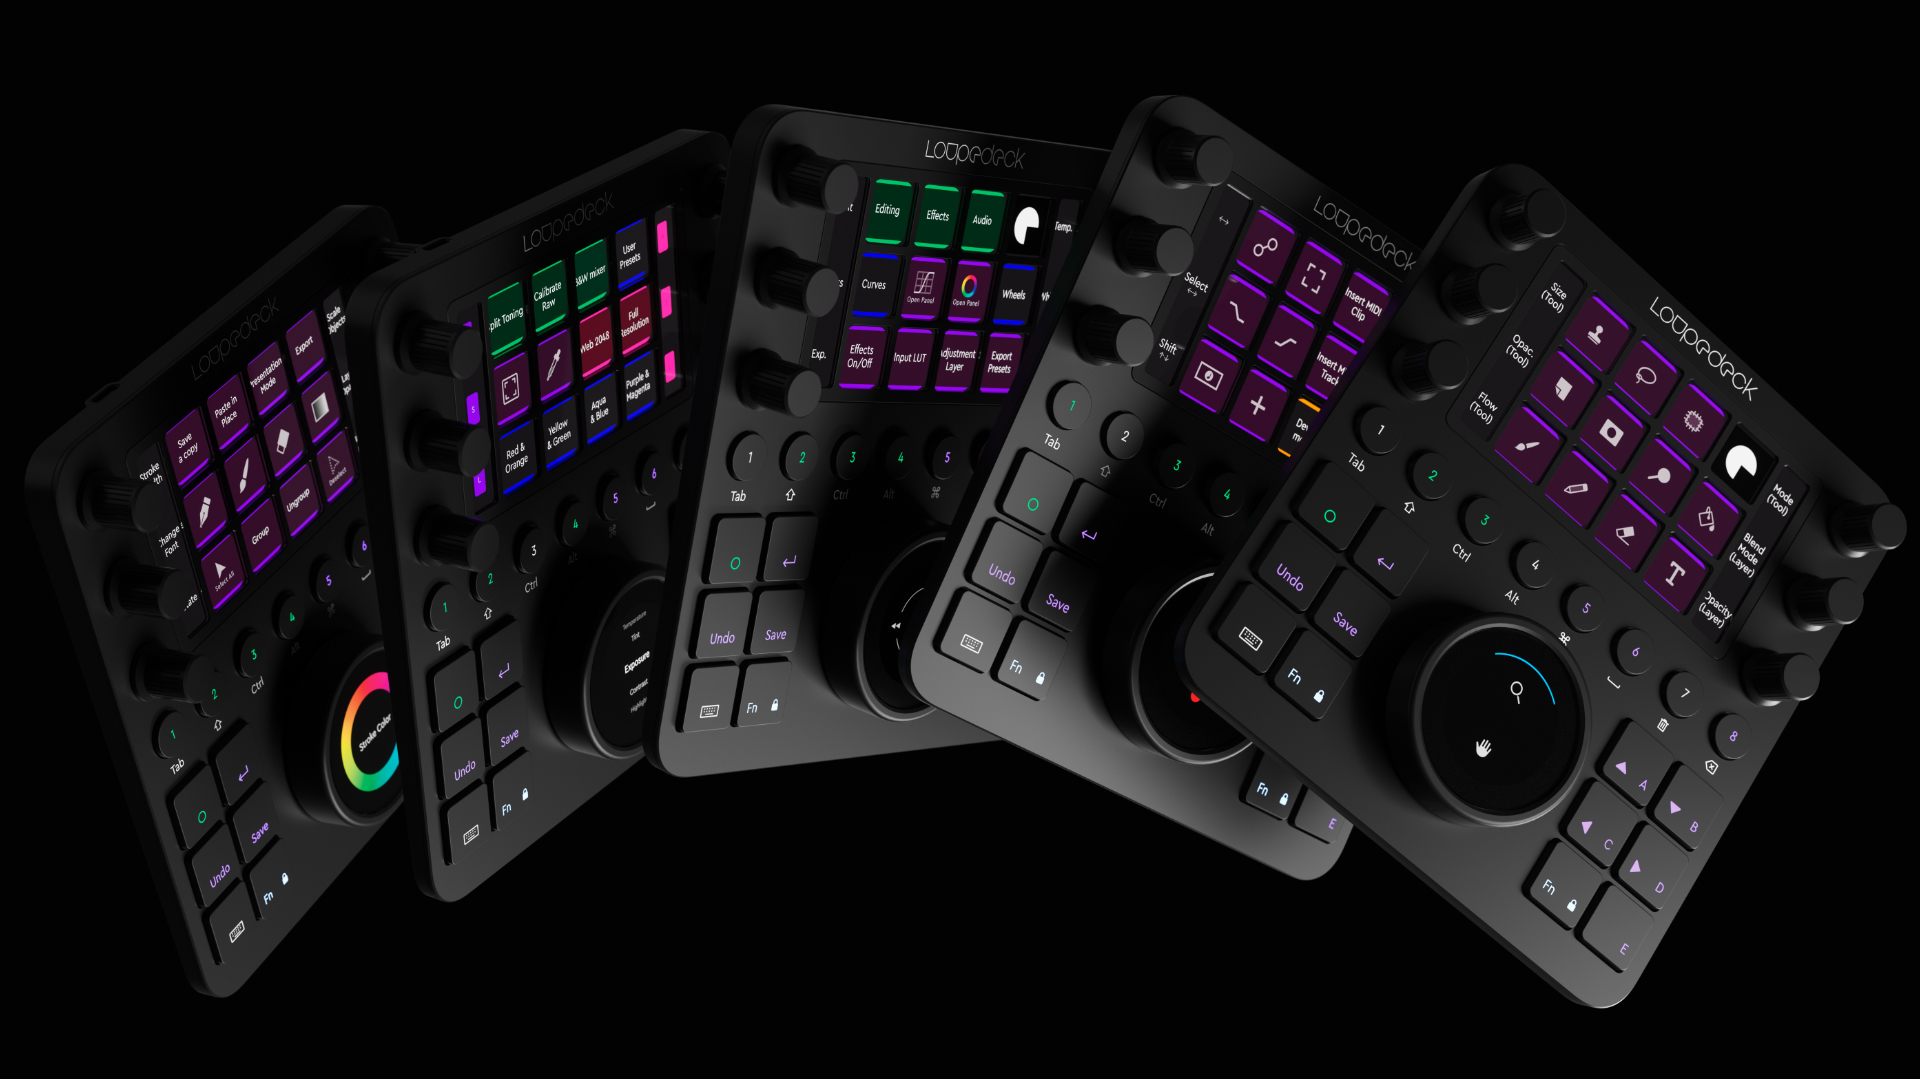 New Loupedeck CT – Control (Almost) All Your Creative Apps